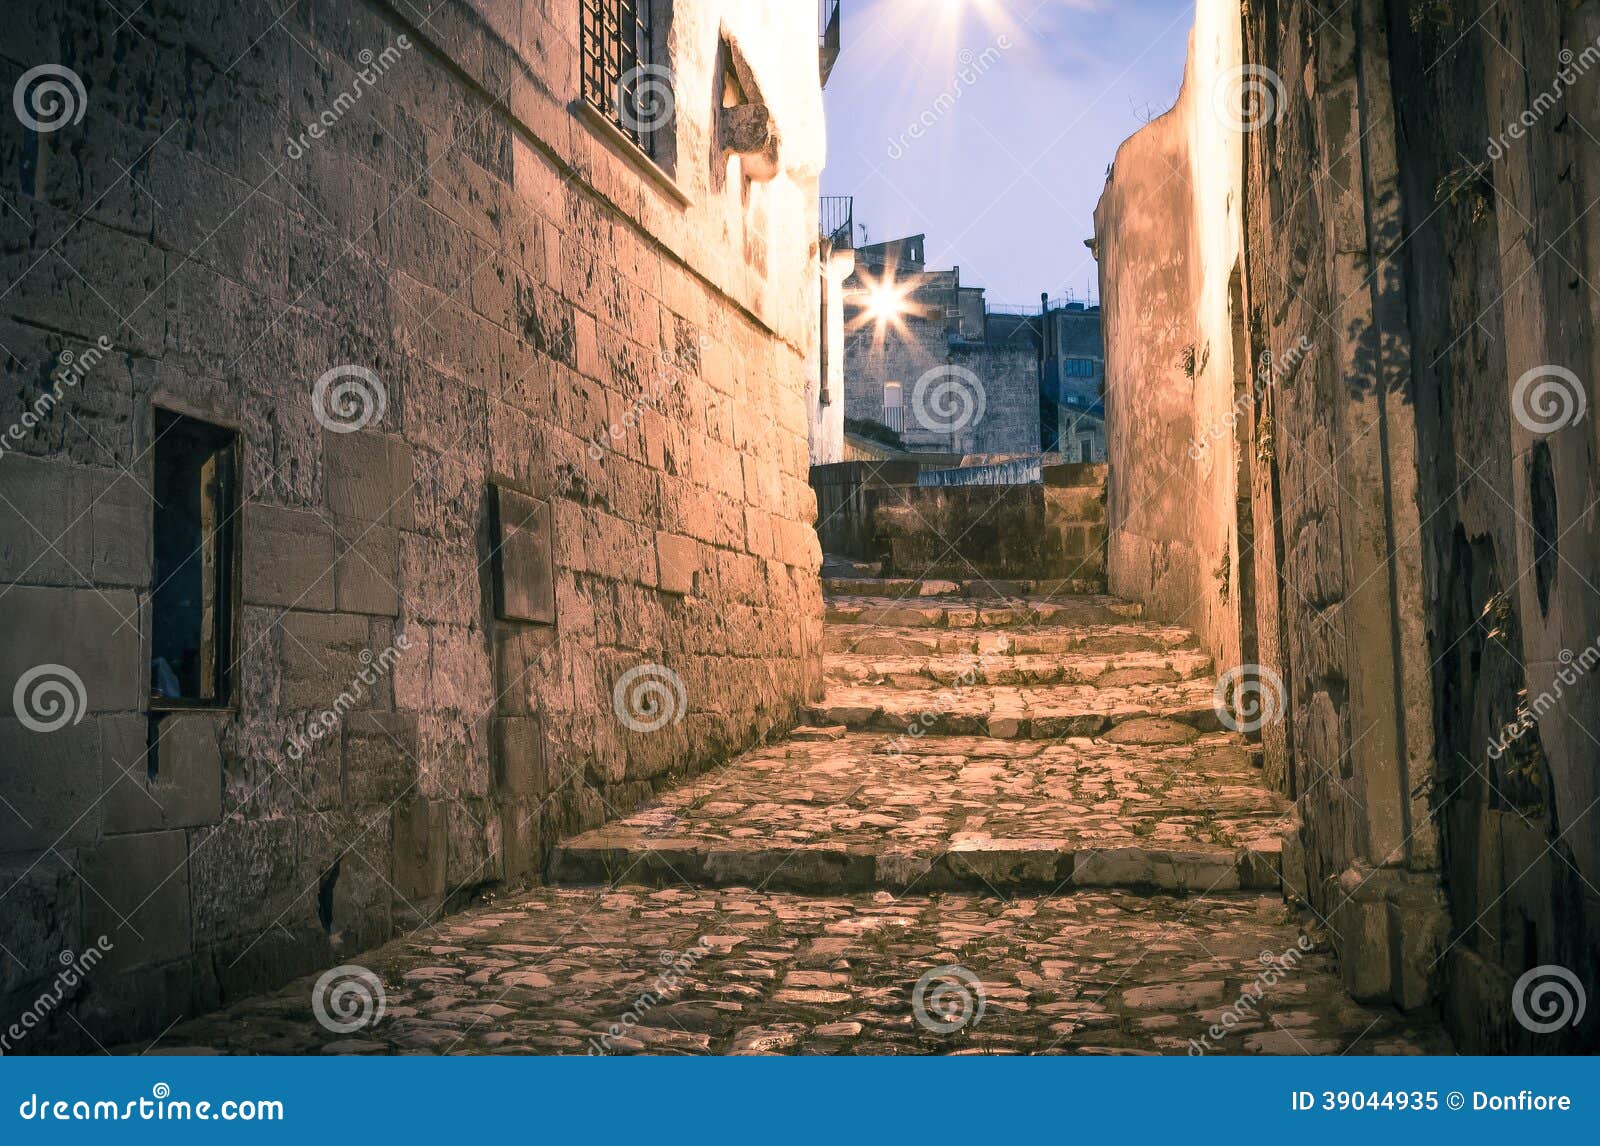 sassi,historic center of the city matera in italy